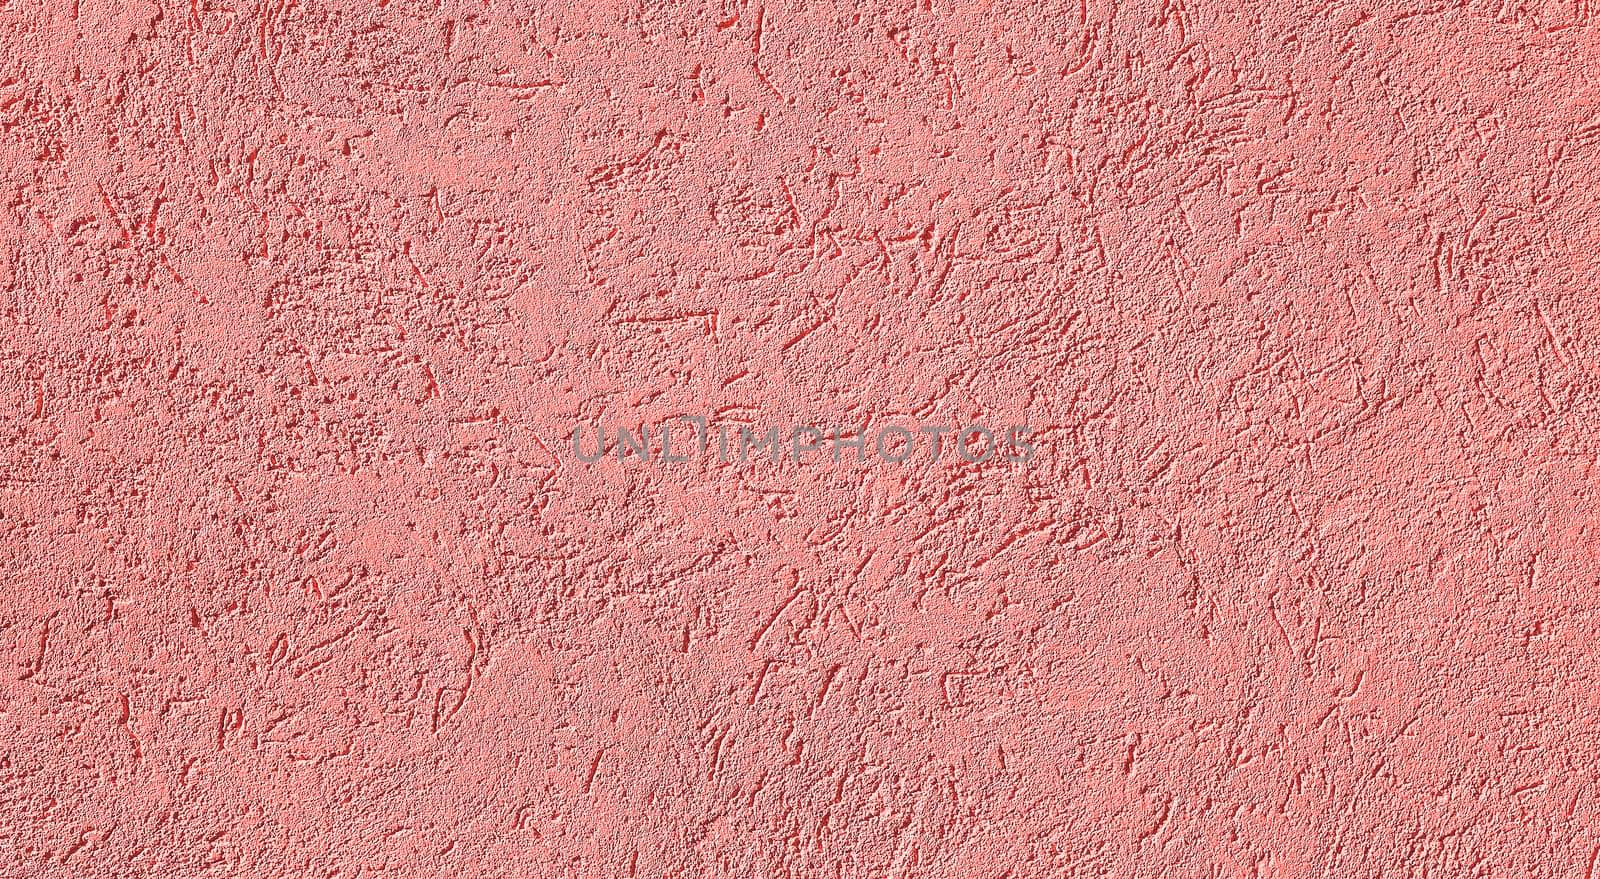 Pink Textured cement or concrete wall background. Deep focus. Mock up or template for modern design.